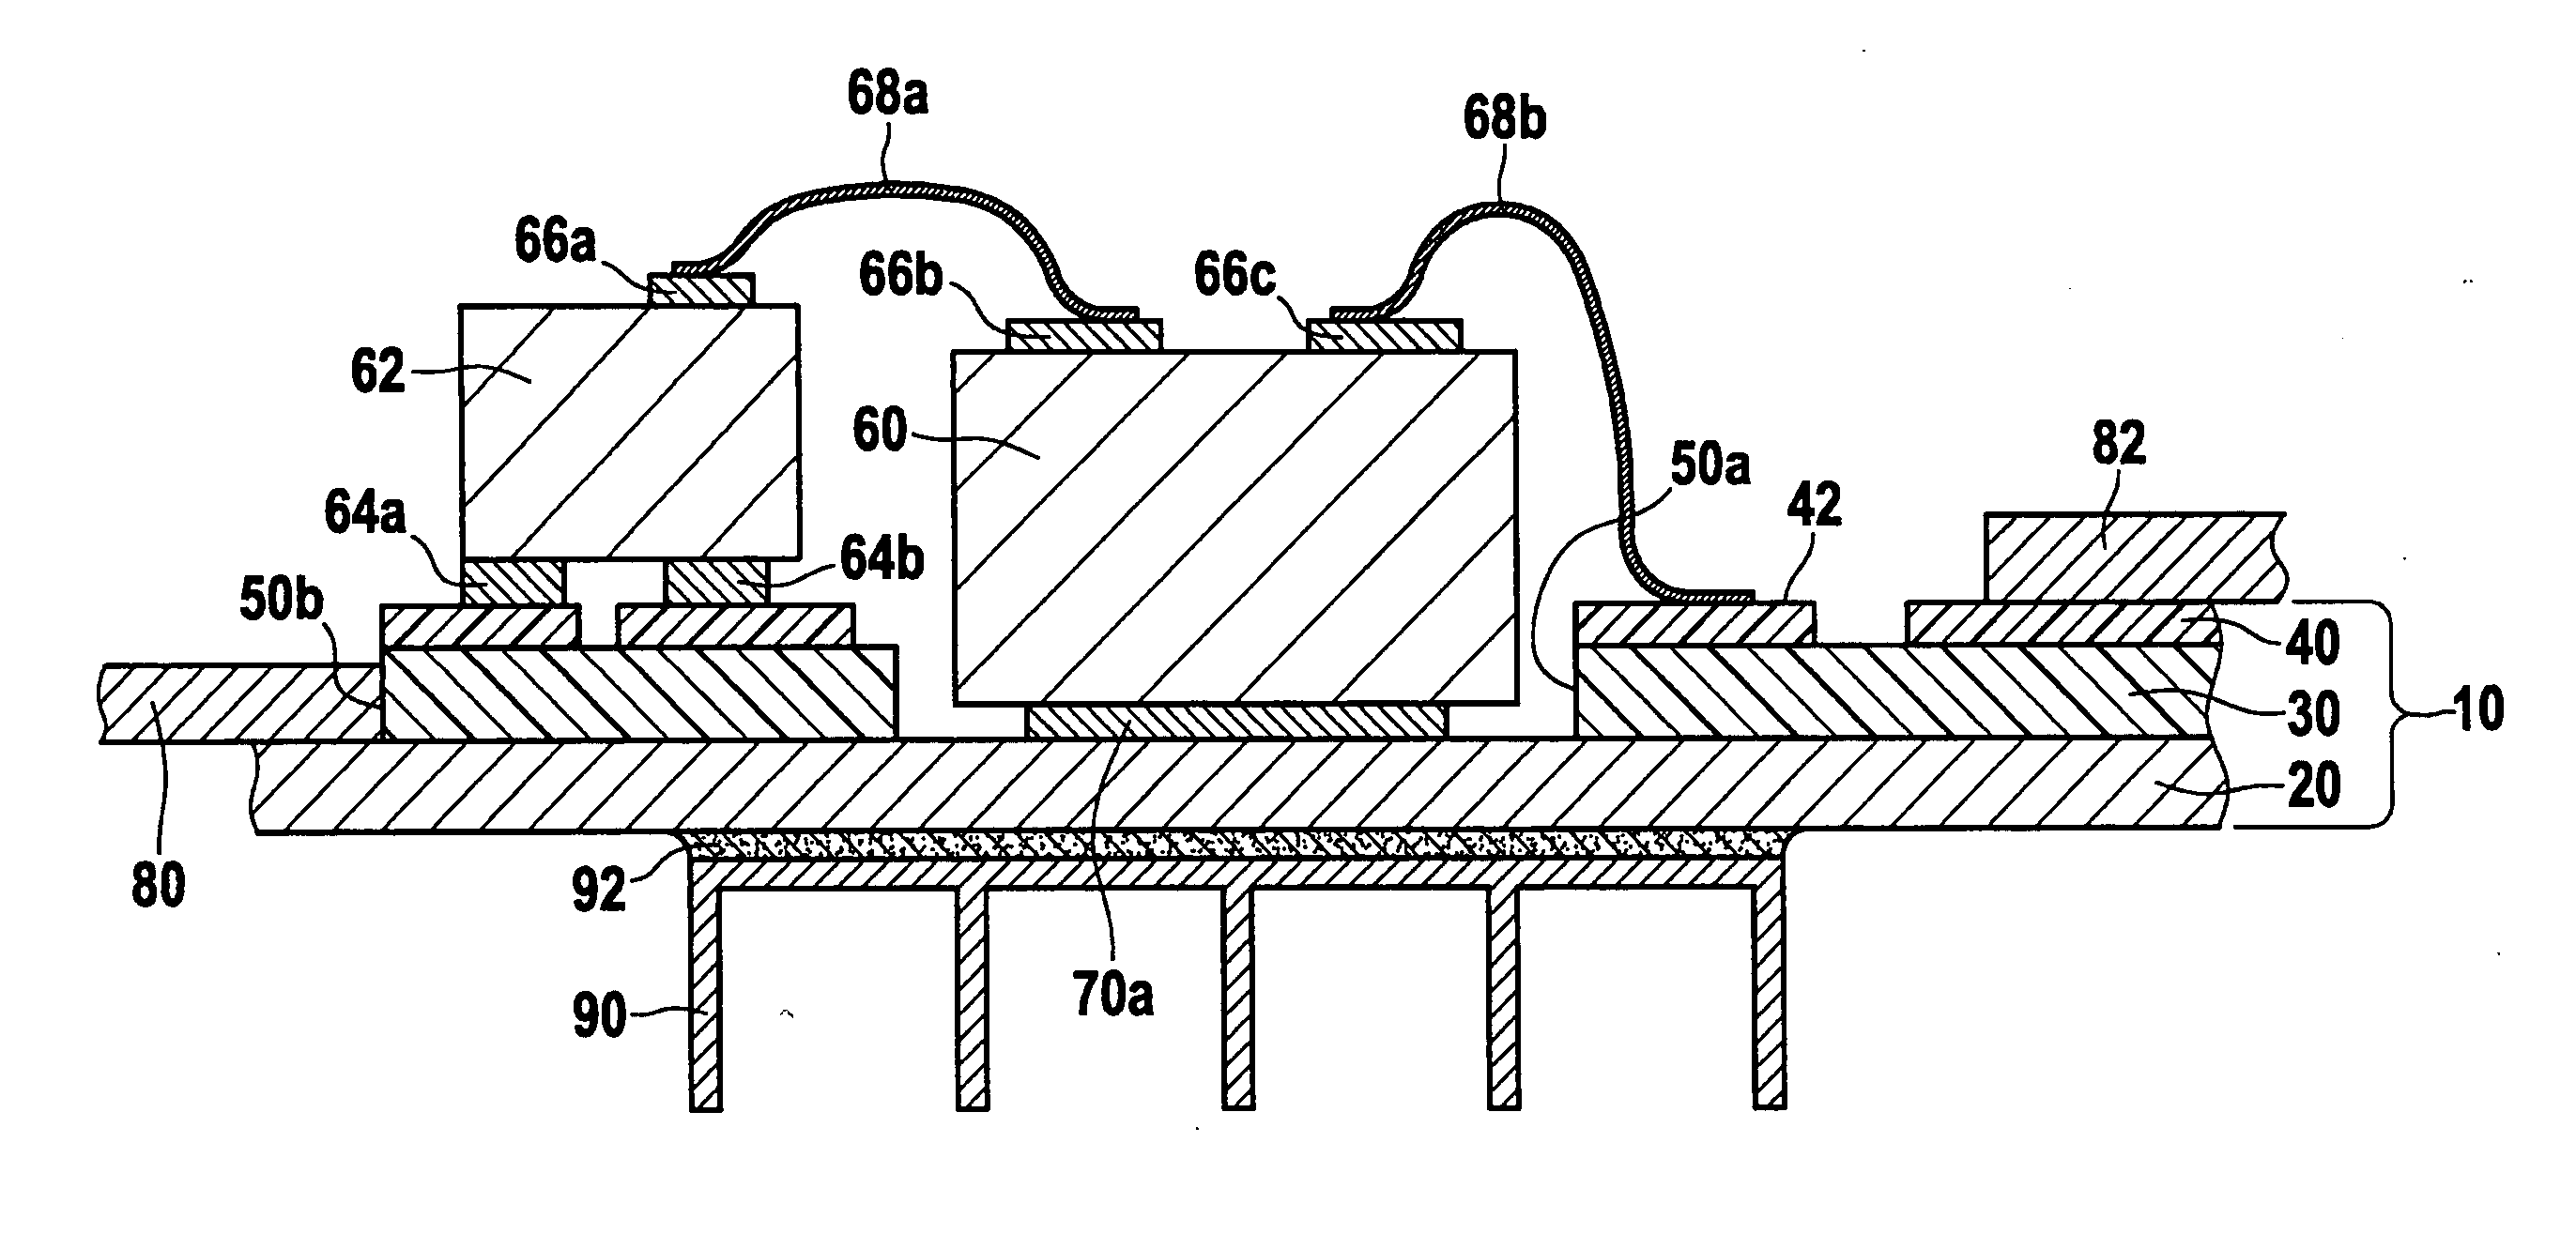 Substrate-mounted circuit module having components in a plurality of contacting planes